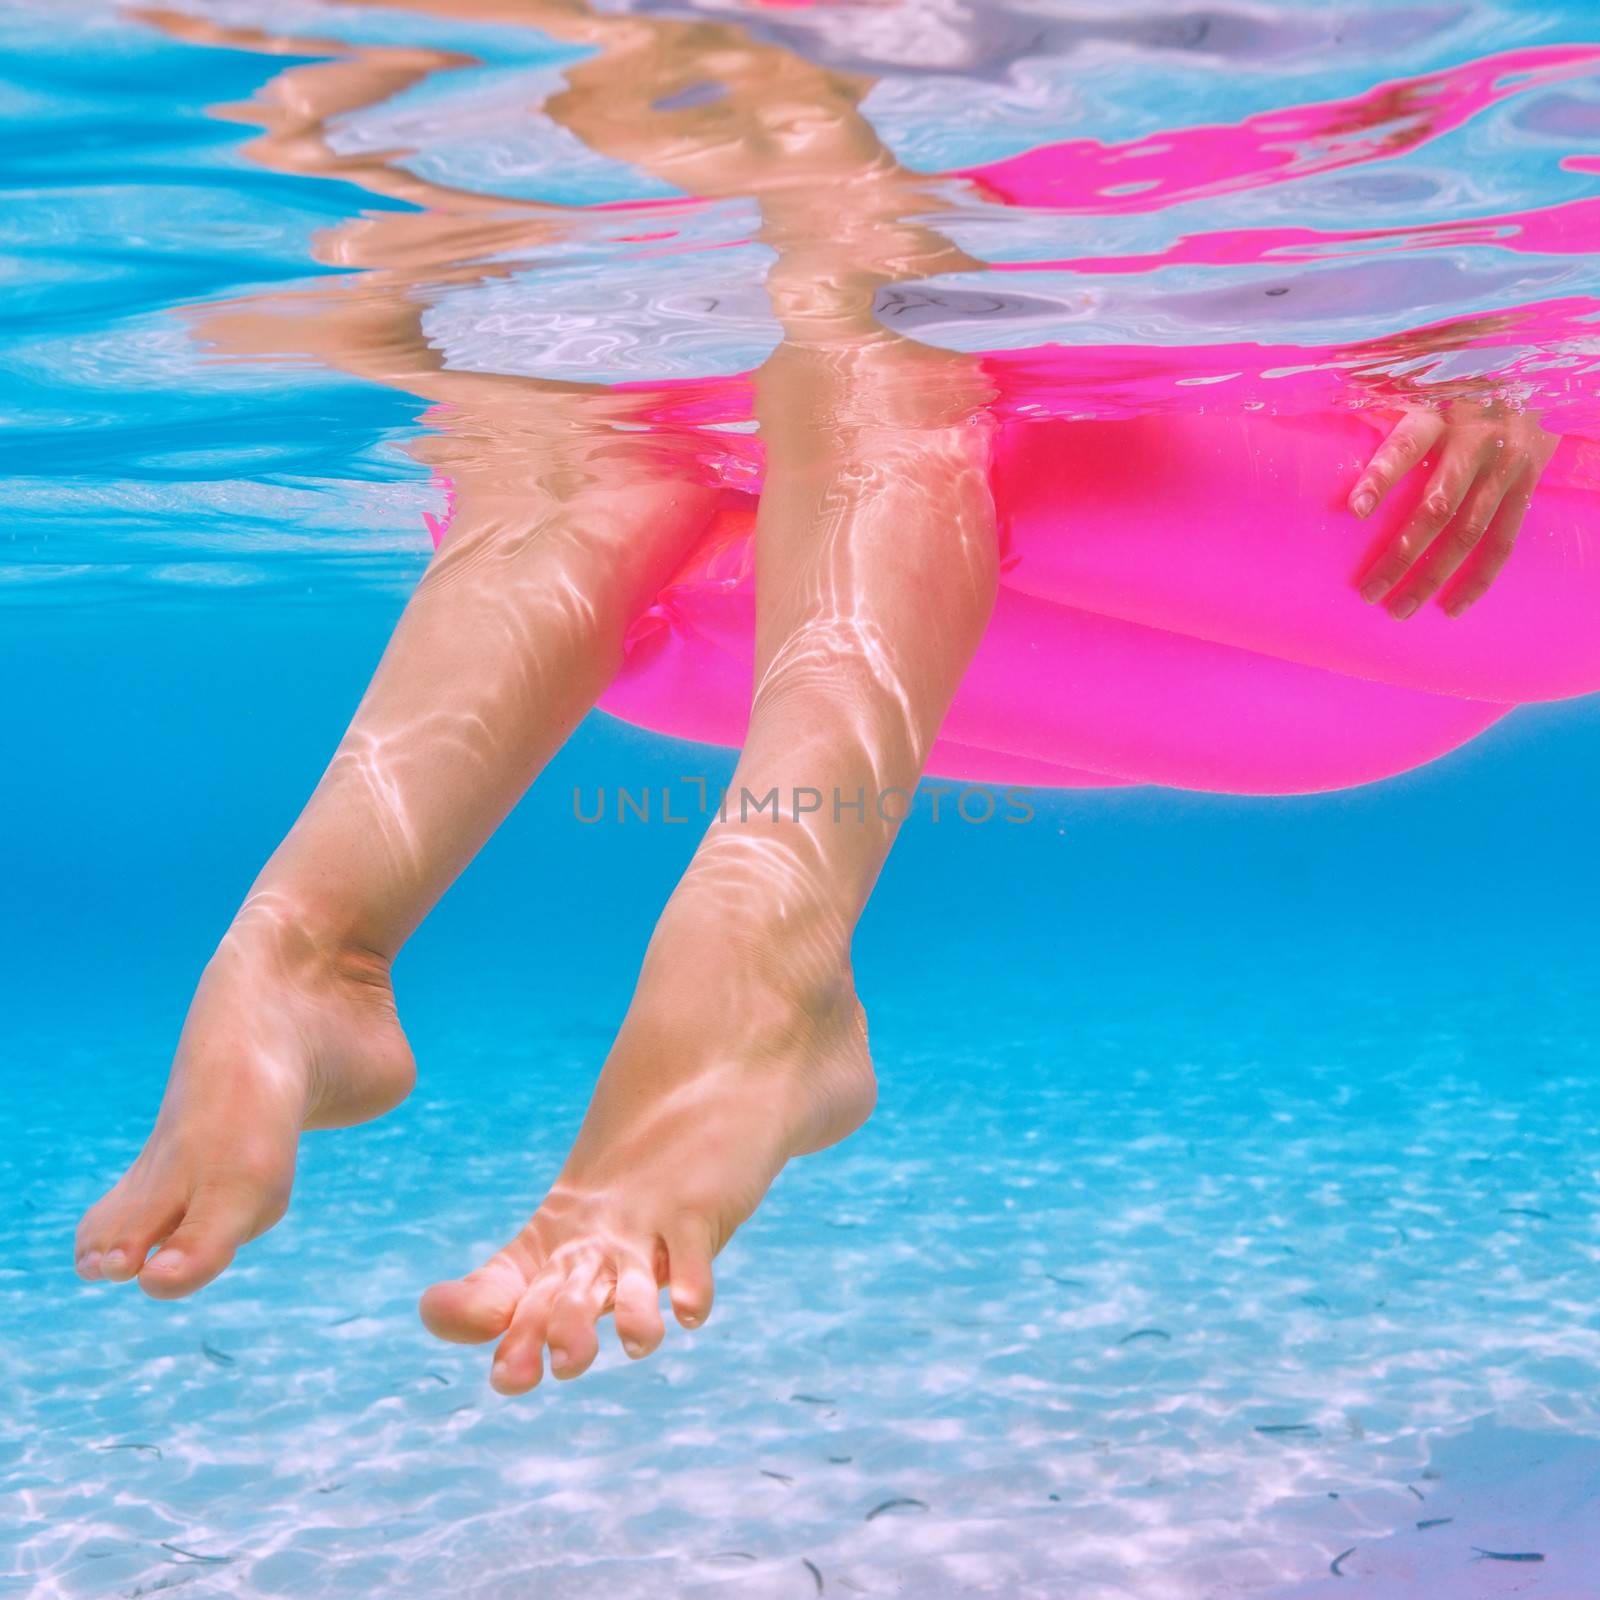 Woman relaxing on inflatable mattress at the beach, view from underwater